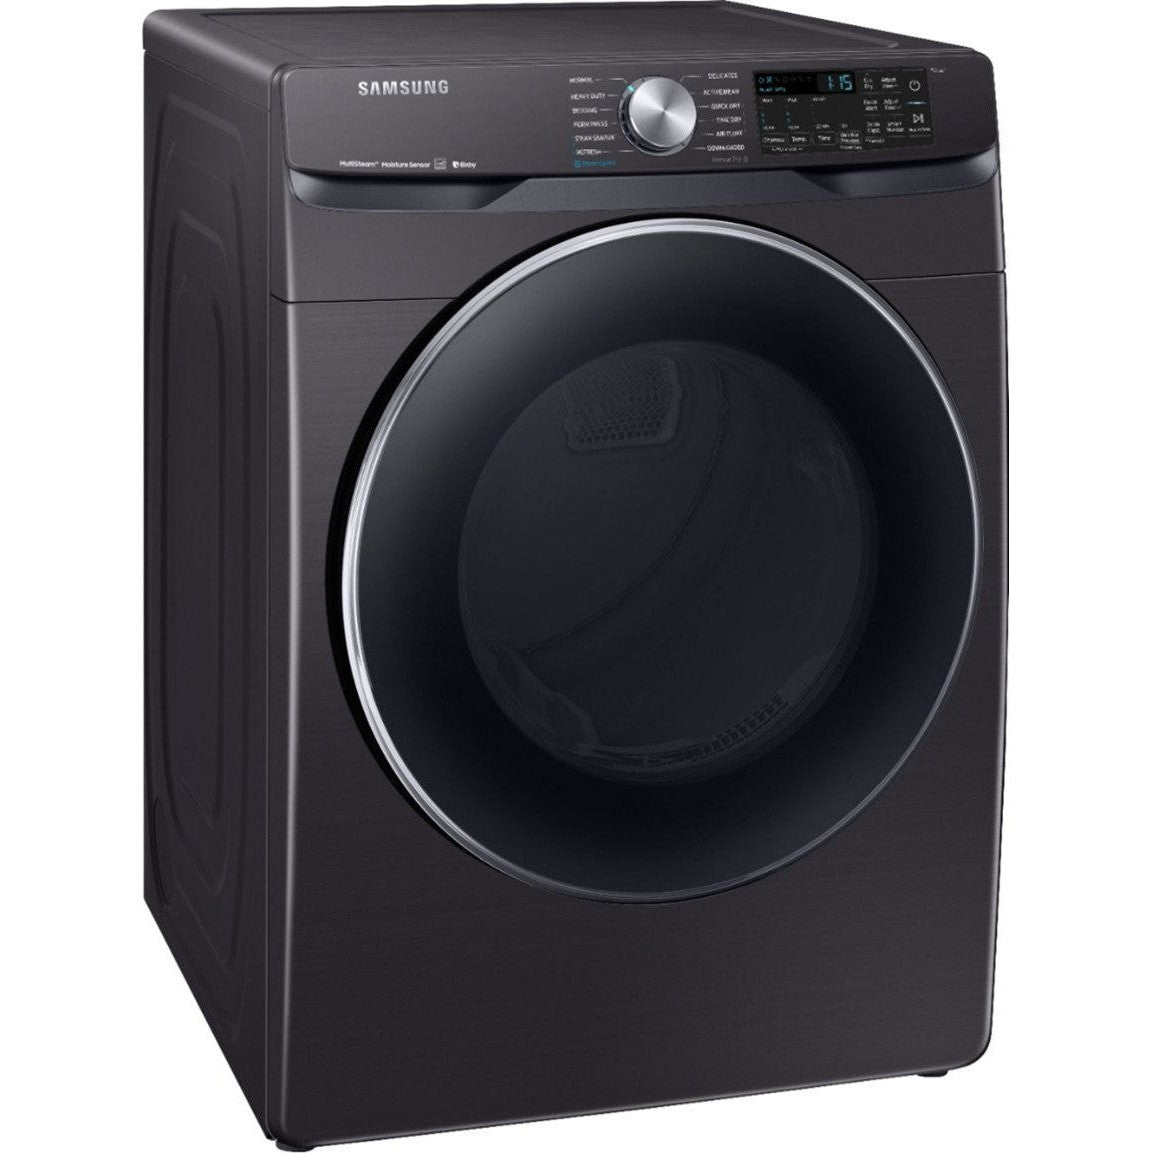 SAMSUNG DVG45R6300V/A3 7.5 cu. ft. Smart Gas Dryer with Steam Sanitize+ in Black Stainless Steel